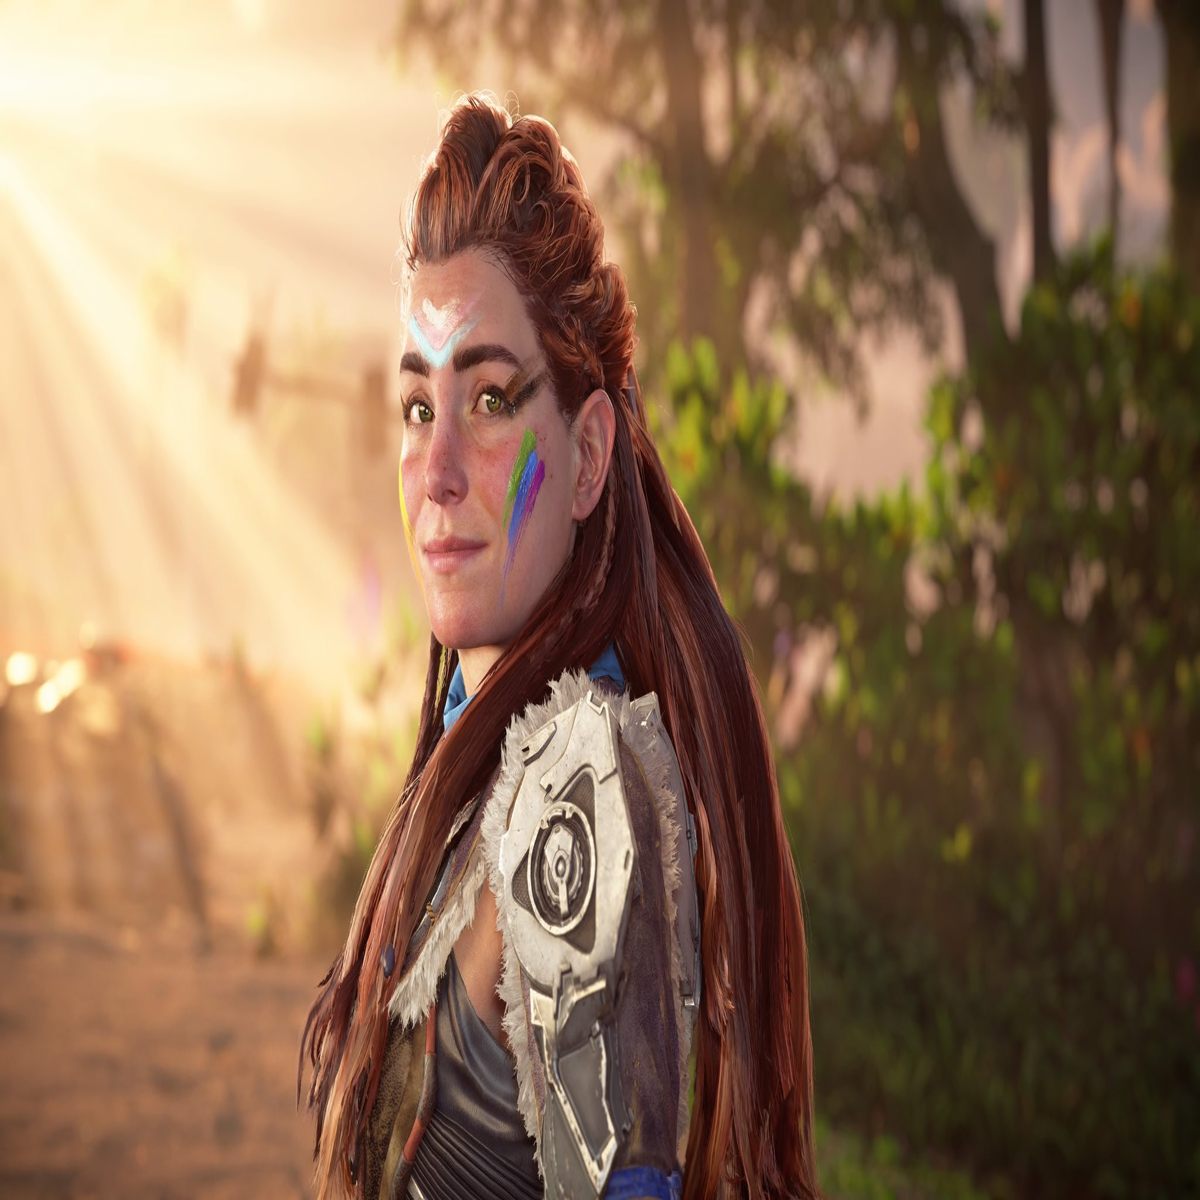 Sony Inspects Aloy's New Face In 'Horizon Forbidden West